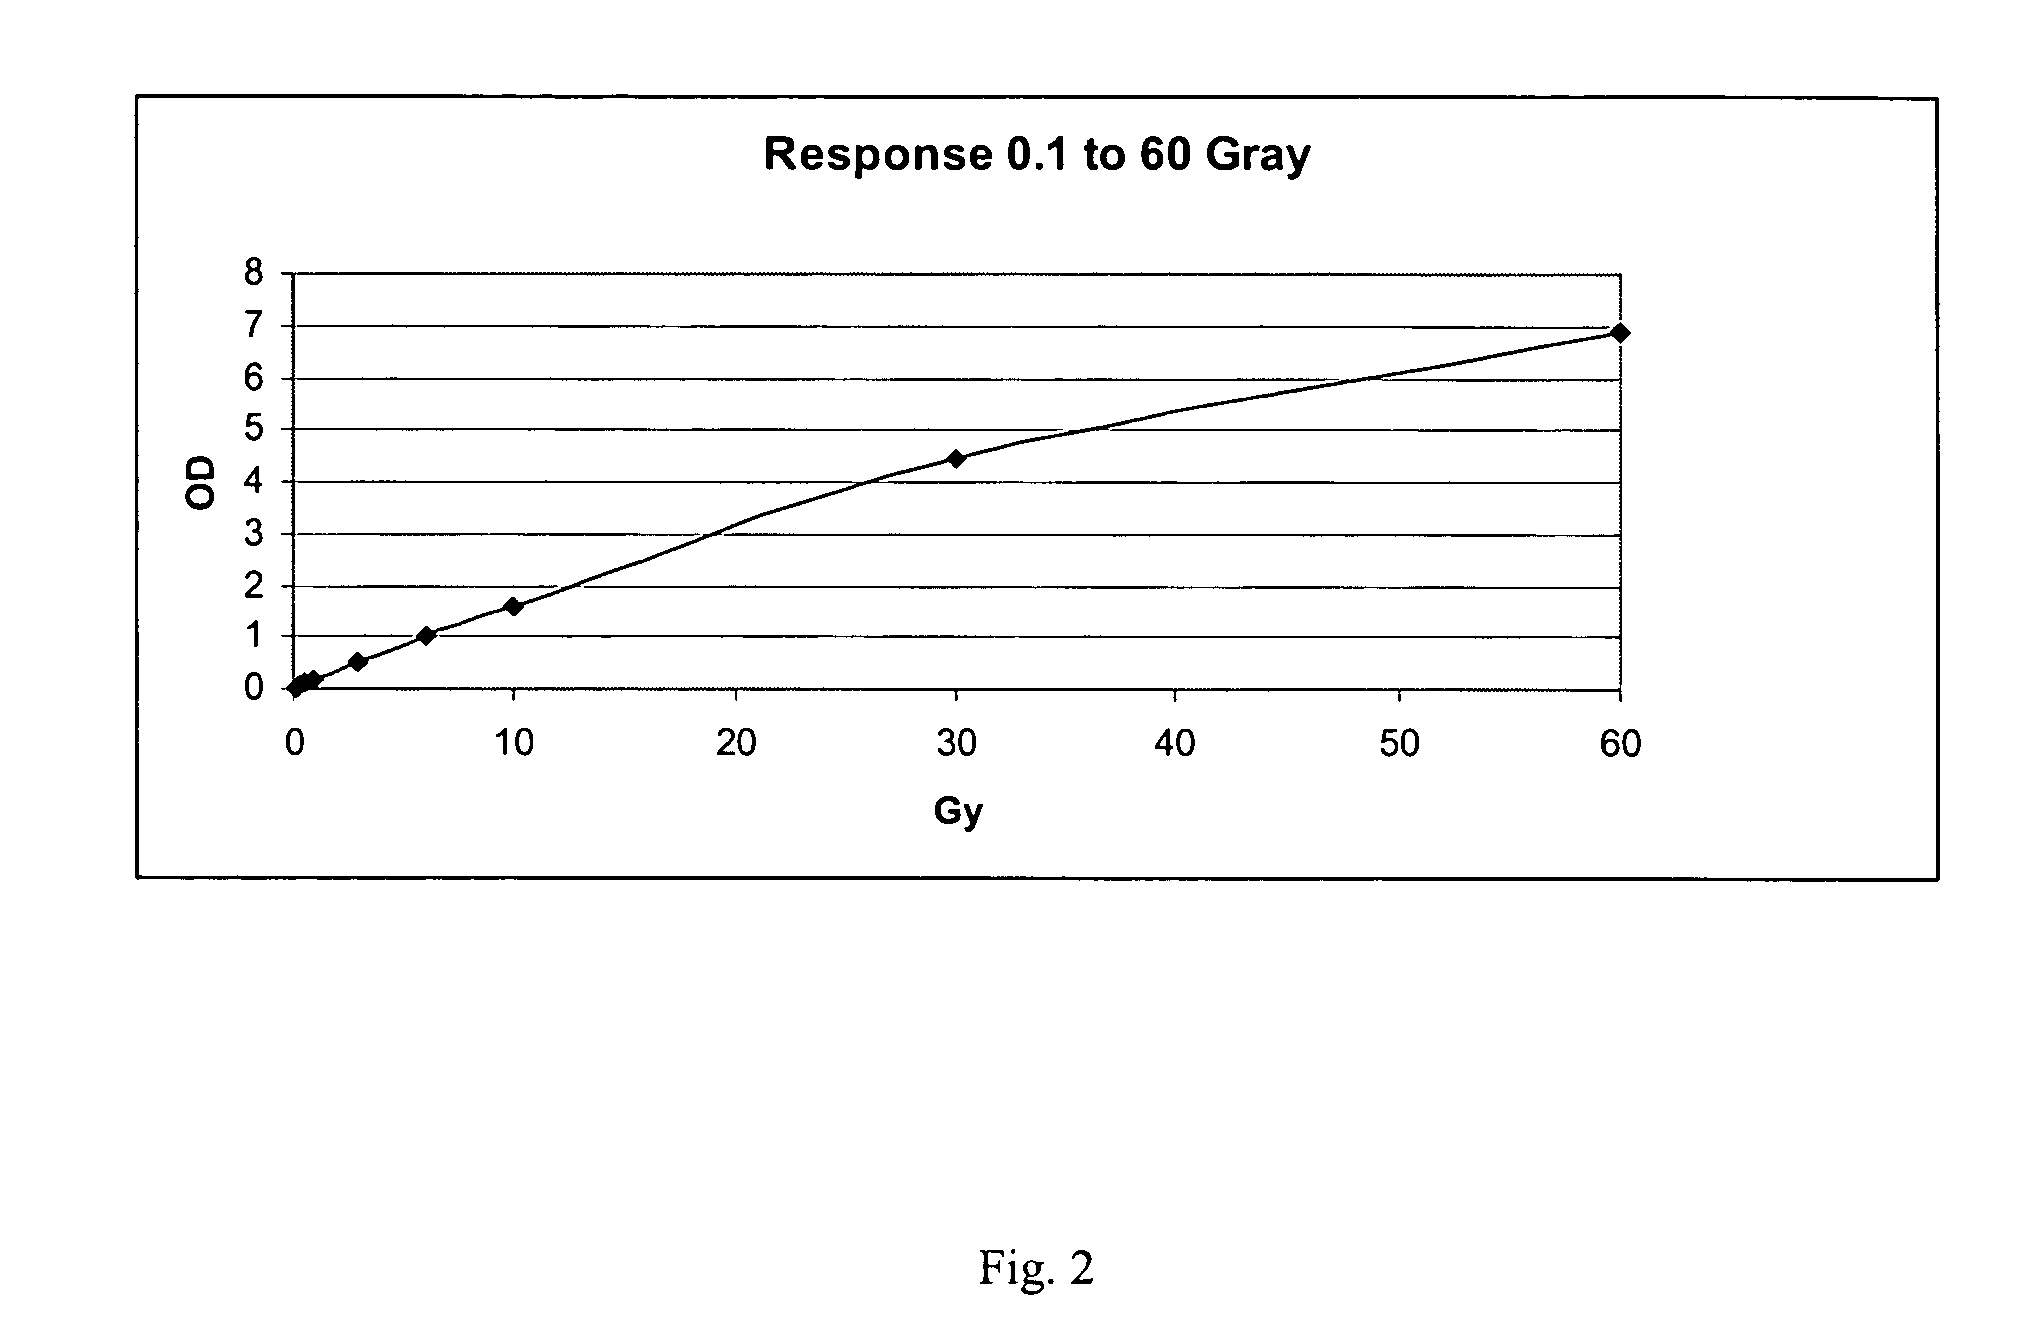 Three-dimensional shaped solid dosimeter and method of use